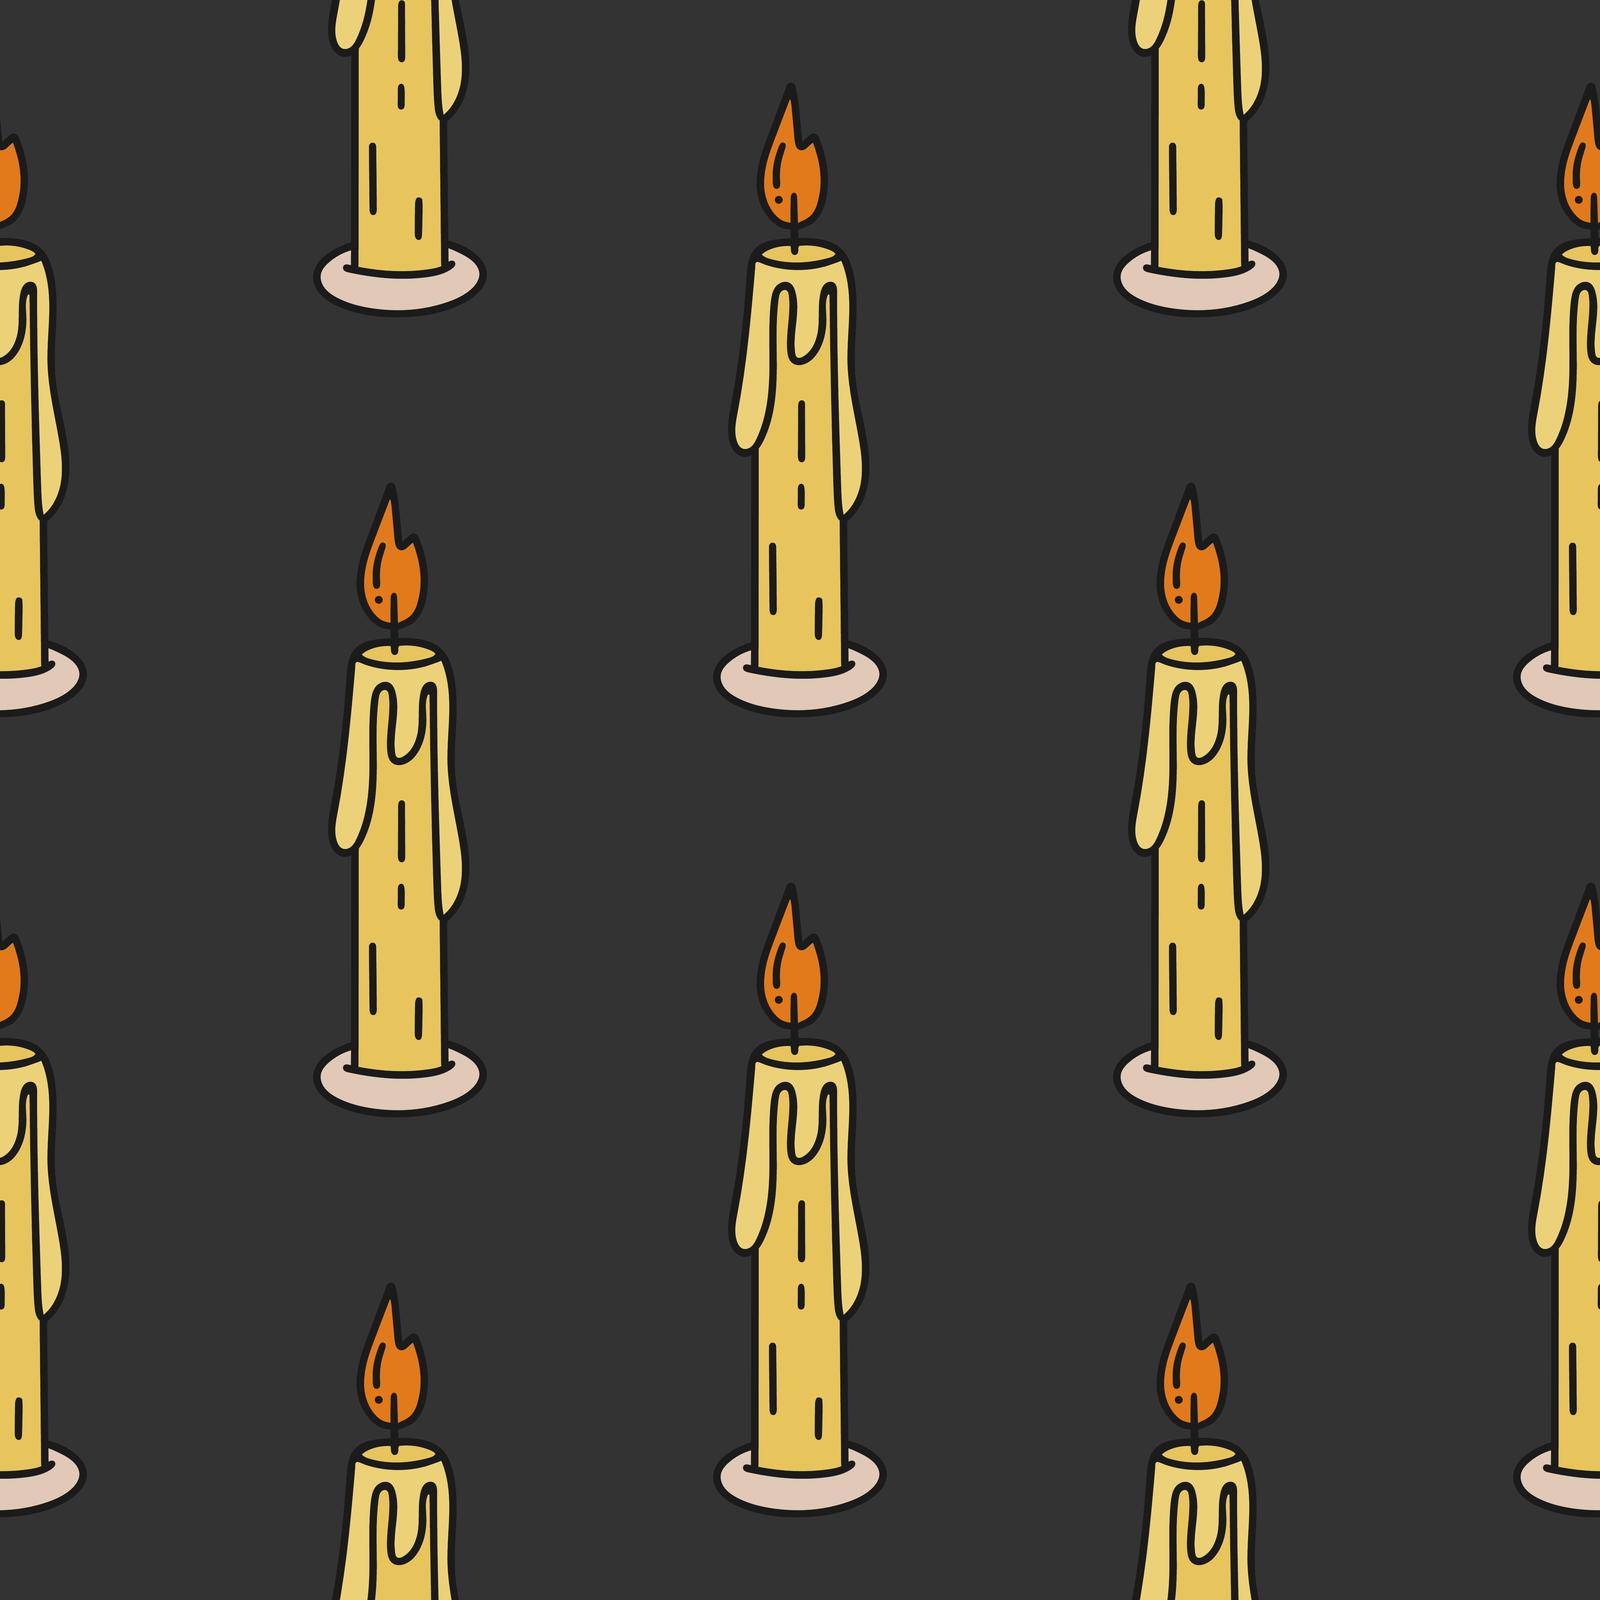 Burning candles on dark background seamless pattern vector illustration. Print with candles for textiles, wallpaper, packaging and design. Magichexic ritual template